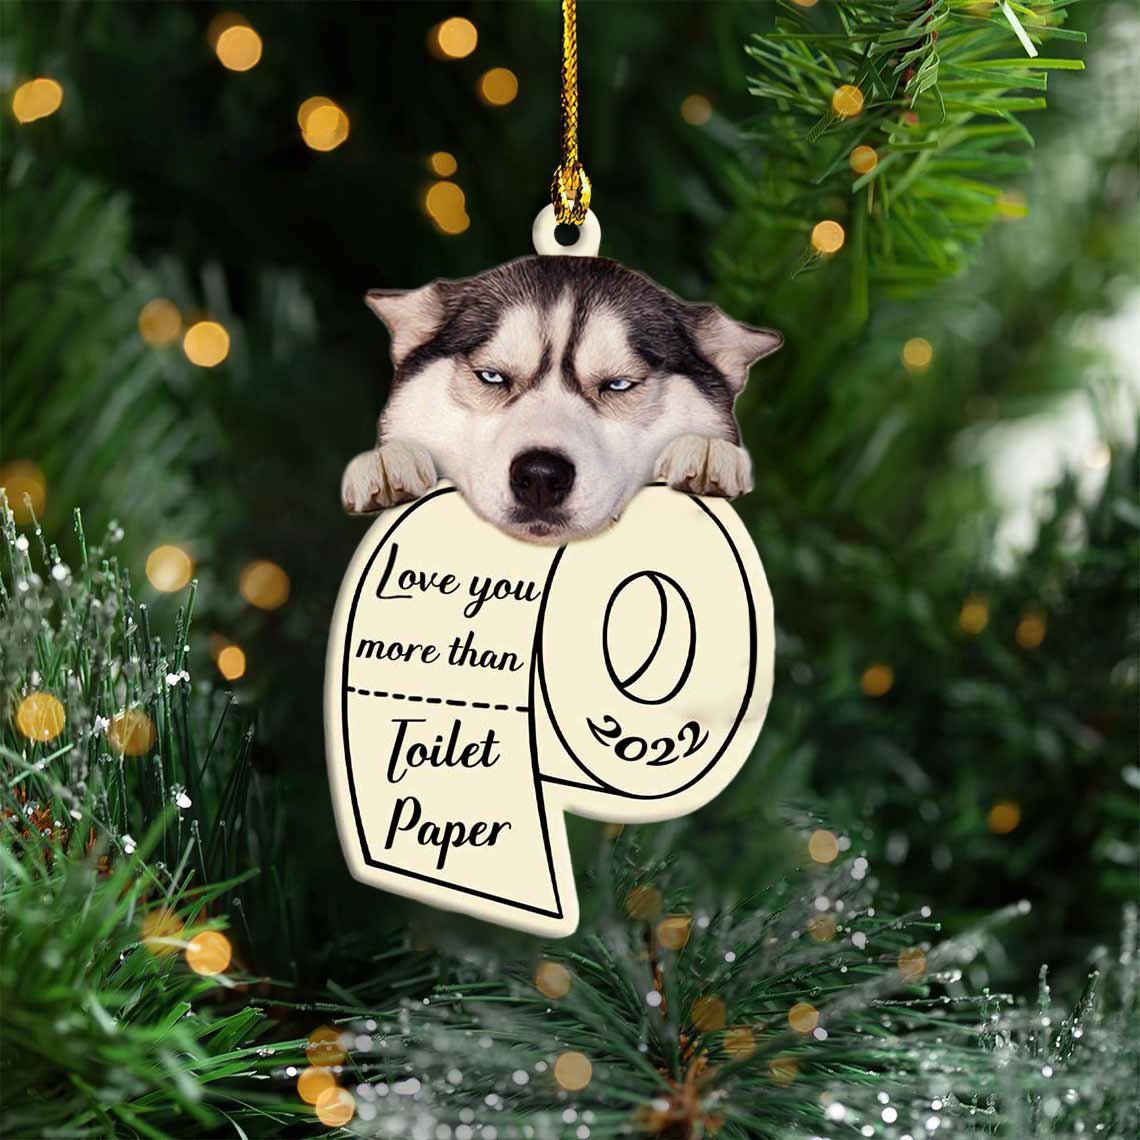 Siberian Husky Love You More Than Toilet Paper 2022 Hanging Ornament